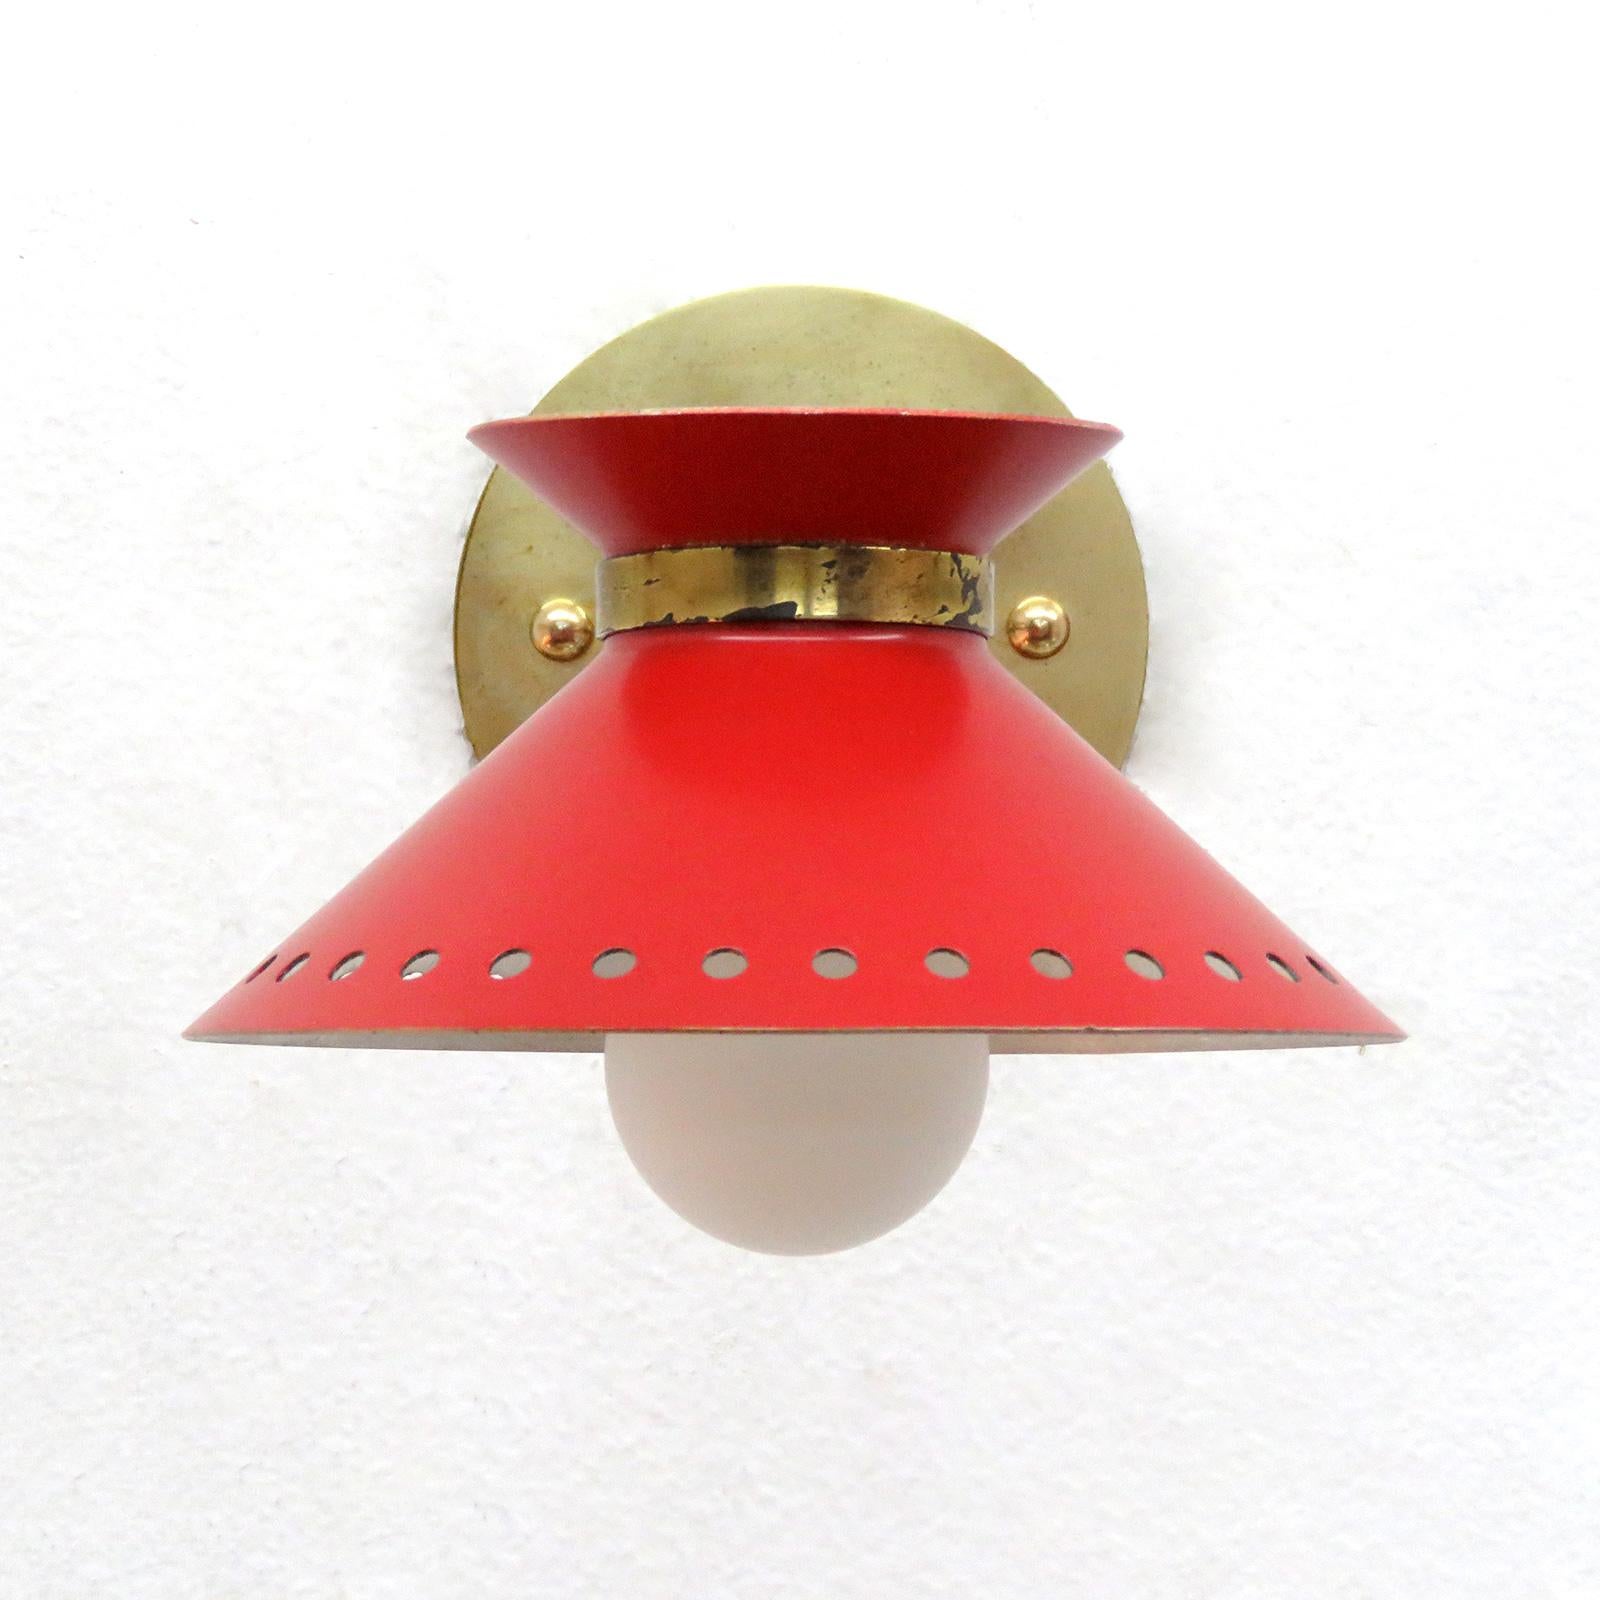 Wonderful pair of red enameled French double cone wall lights by Arlus, with pivoting shades on articulate brass arms, perforated along the bottom edge, wired for US standards, one E12 socket per light, max. wattage 75w, bulbs provided as a one time